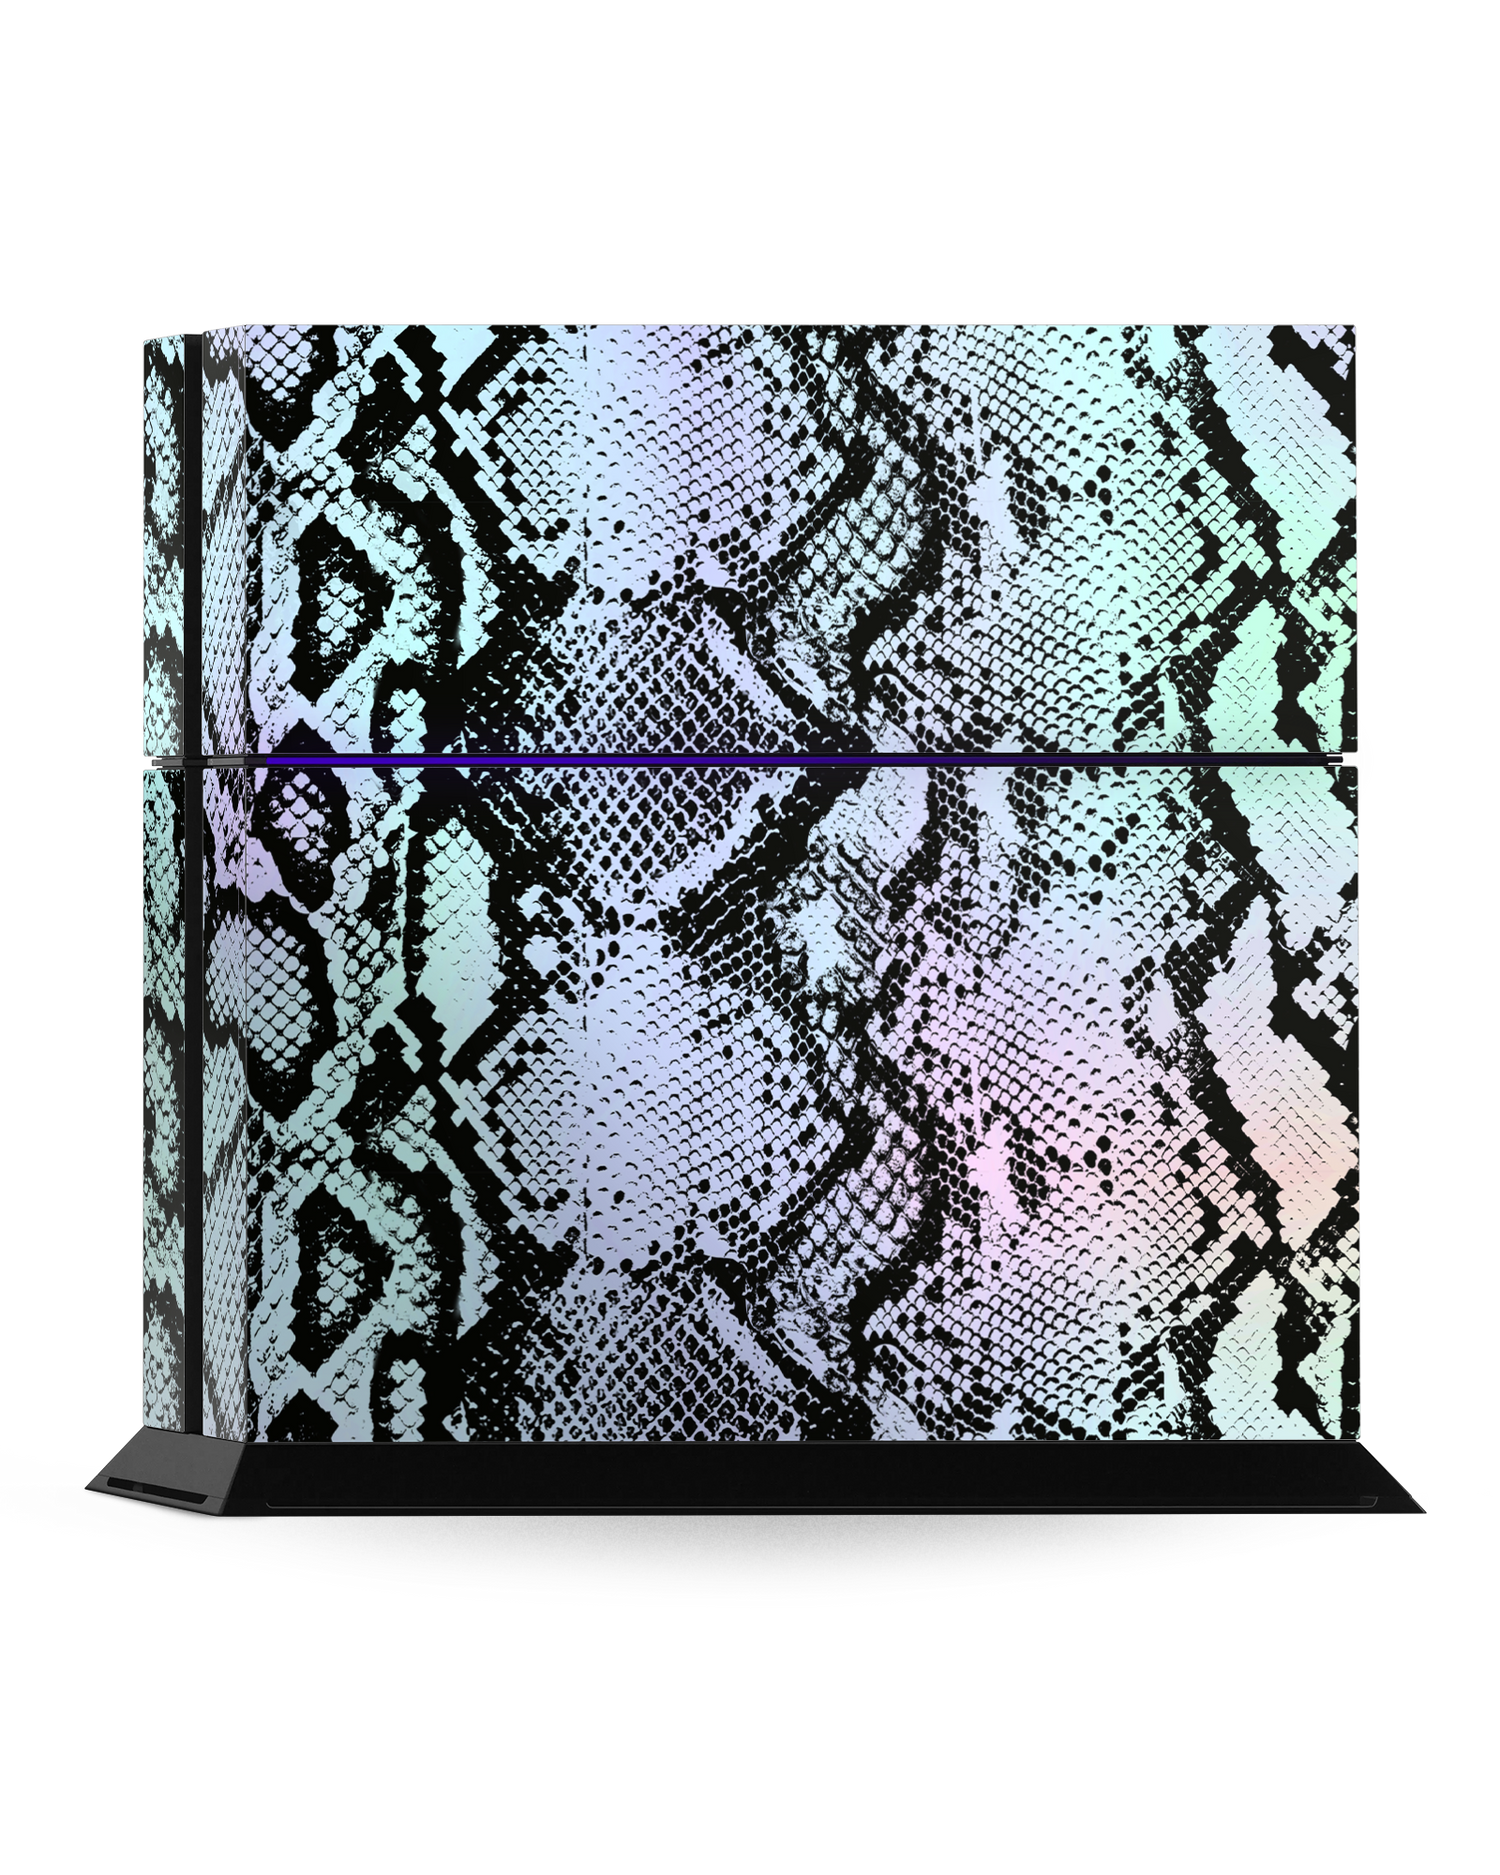 Groovy Snakeskin Console Skin for Sony PlayStation 4: Standing